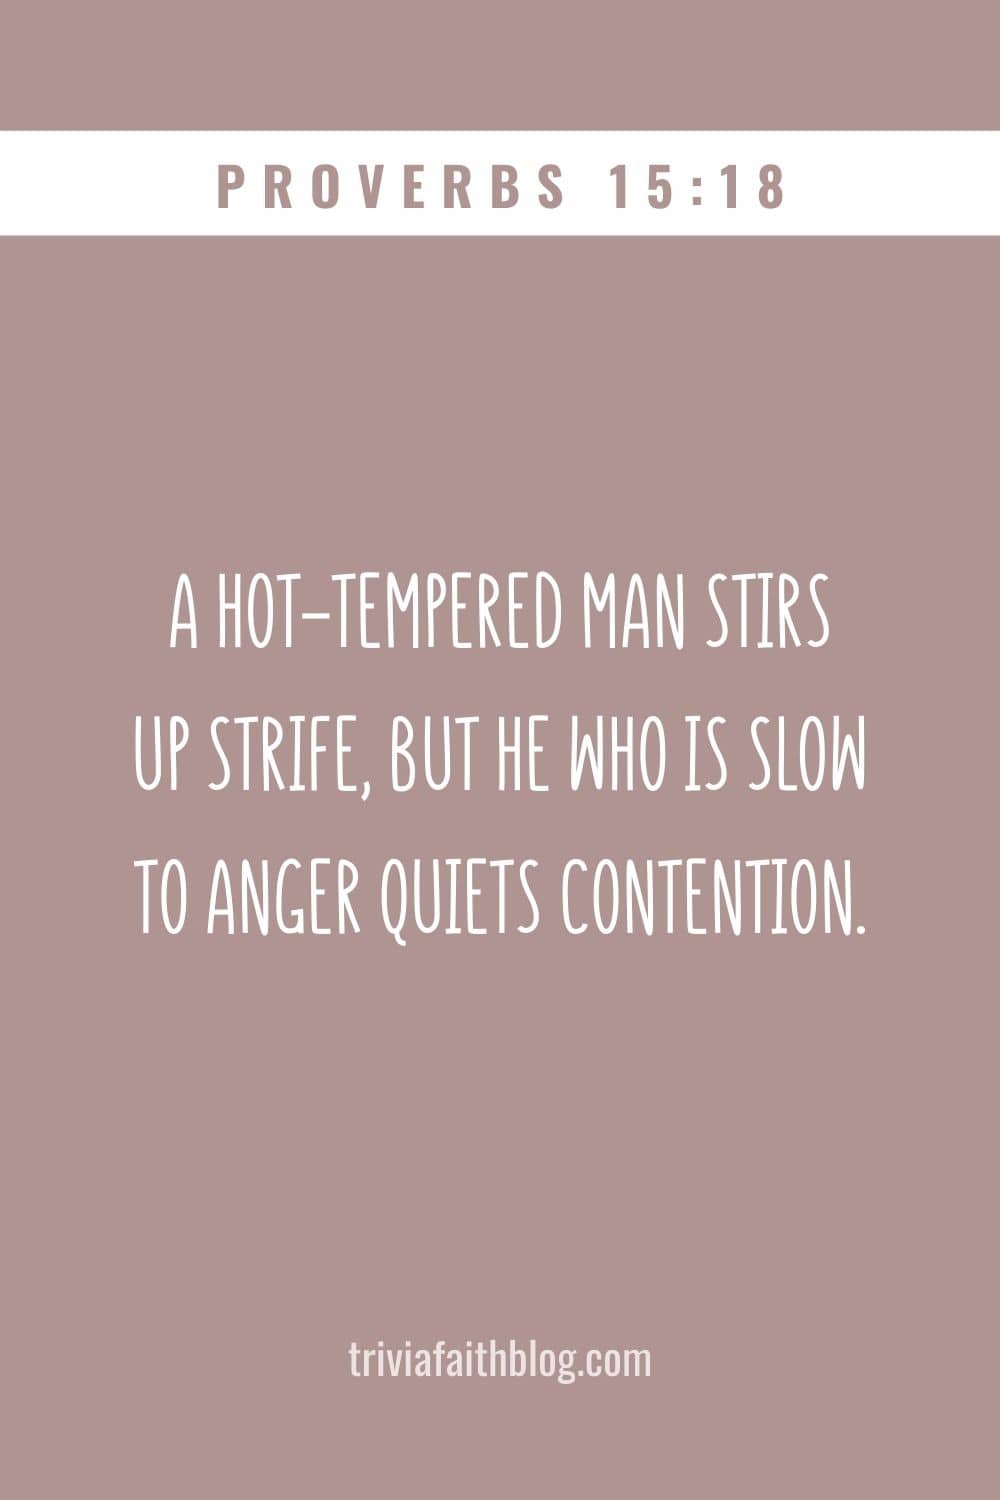 A hot-tempered man stirs up strife, but he who is slow to anger quiets contention